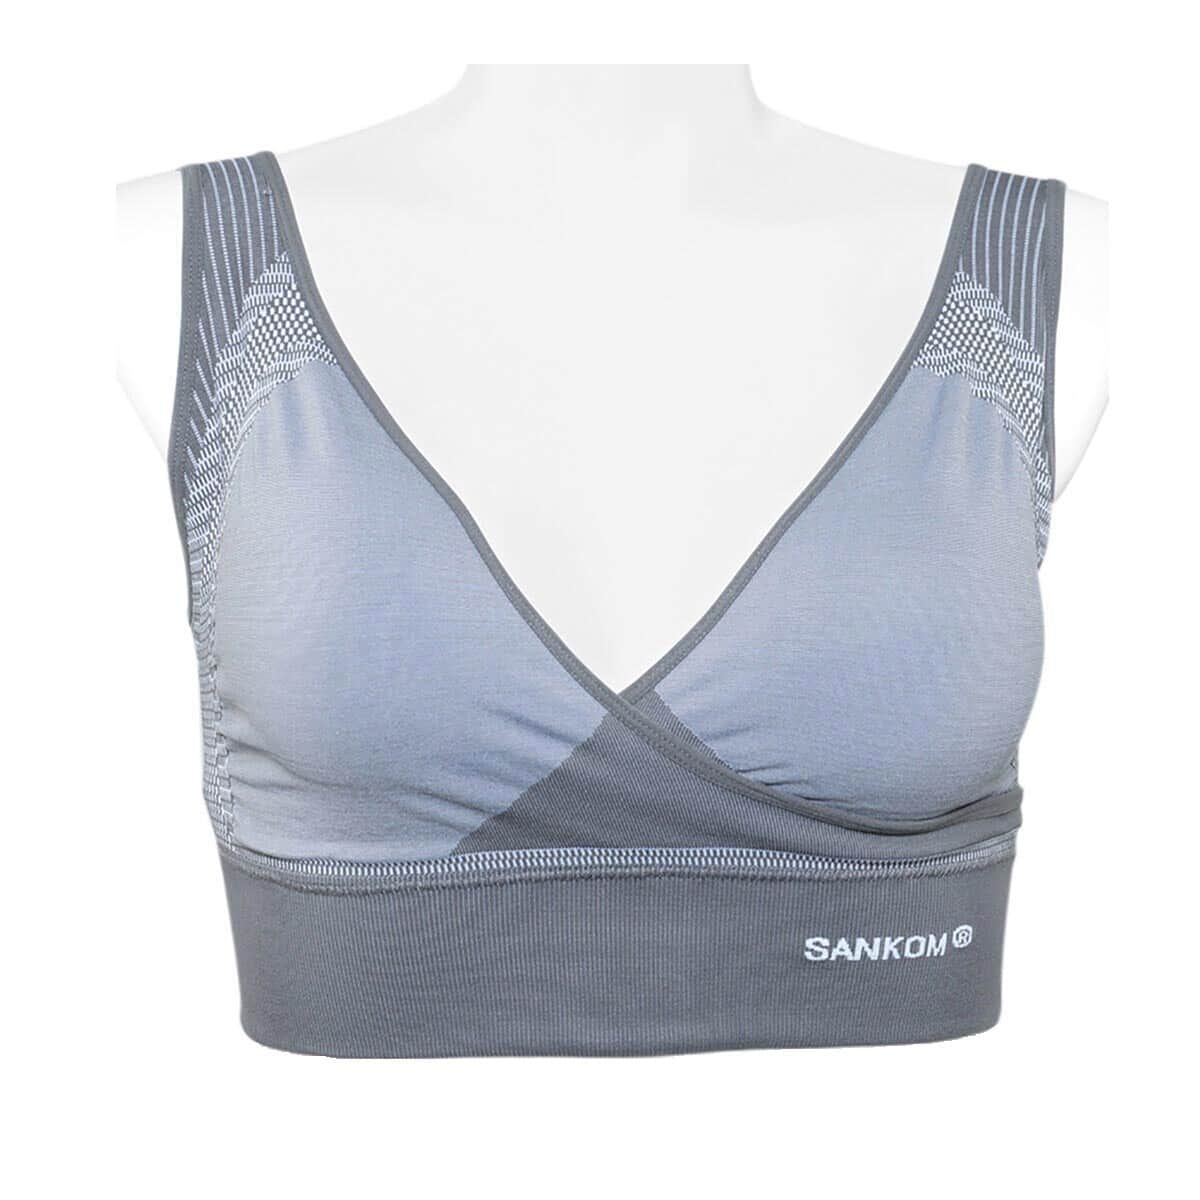 SANKOM-Gray Support & Posture Bra with Bamboo Fibers (M/L) image number 0